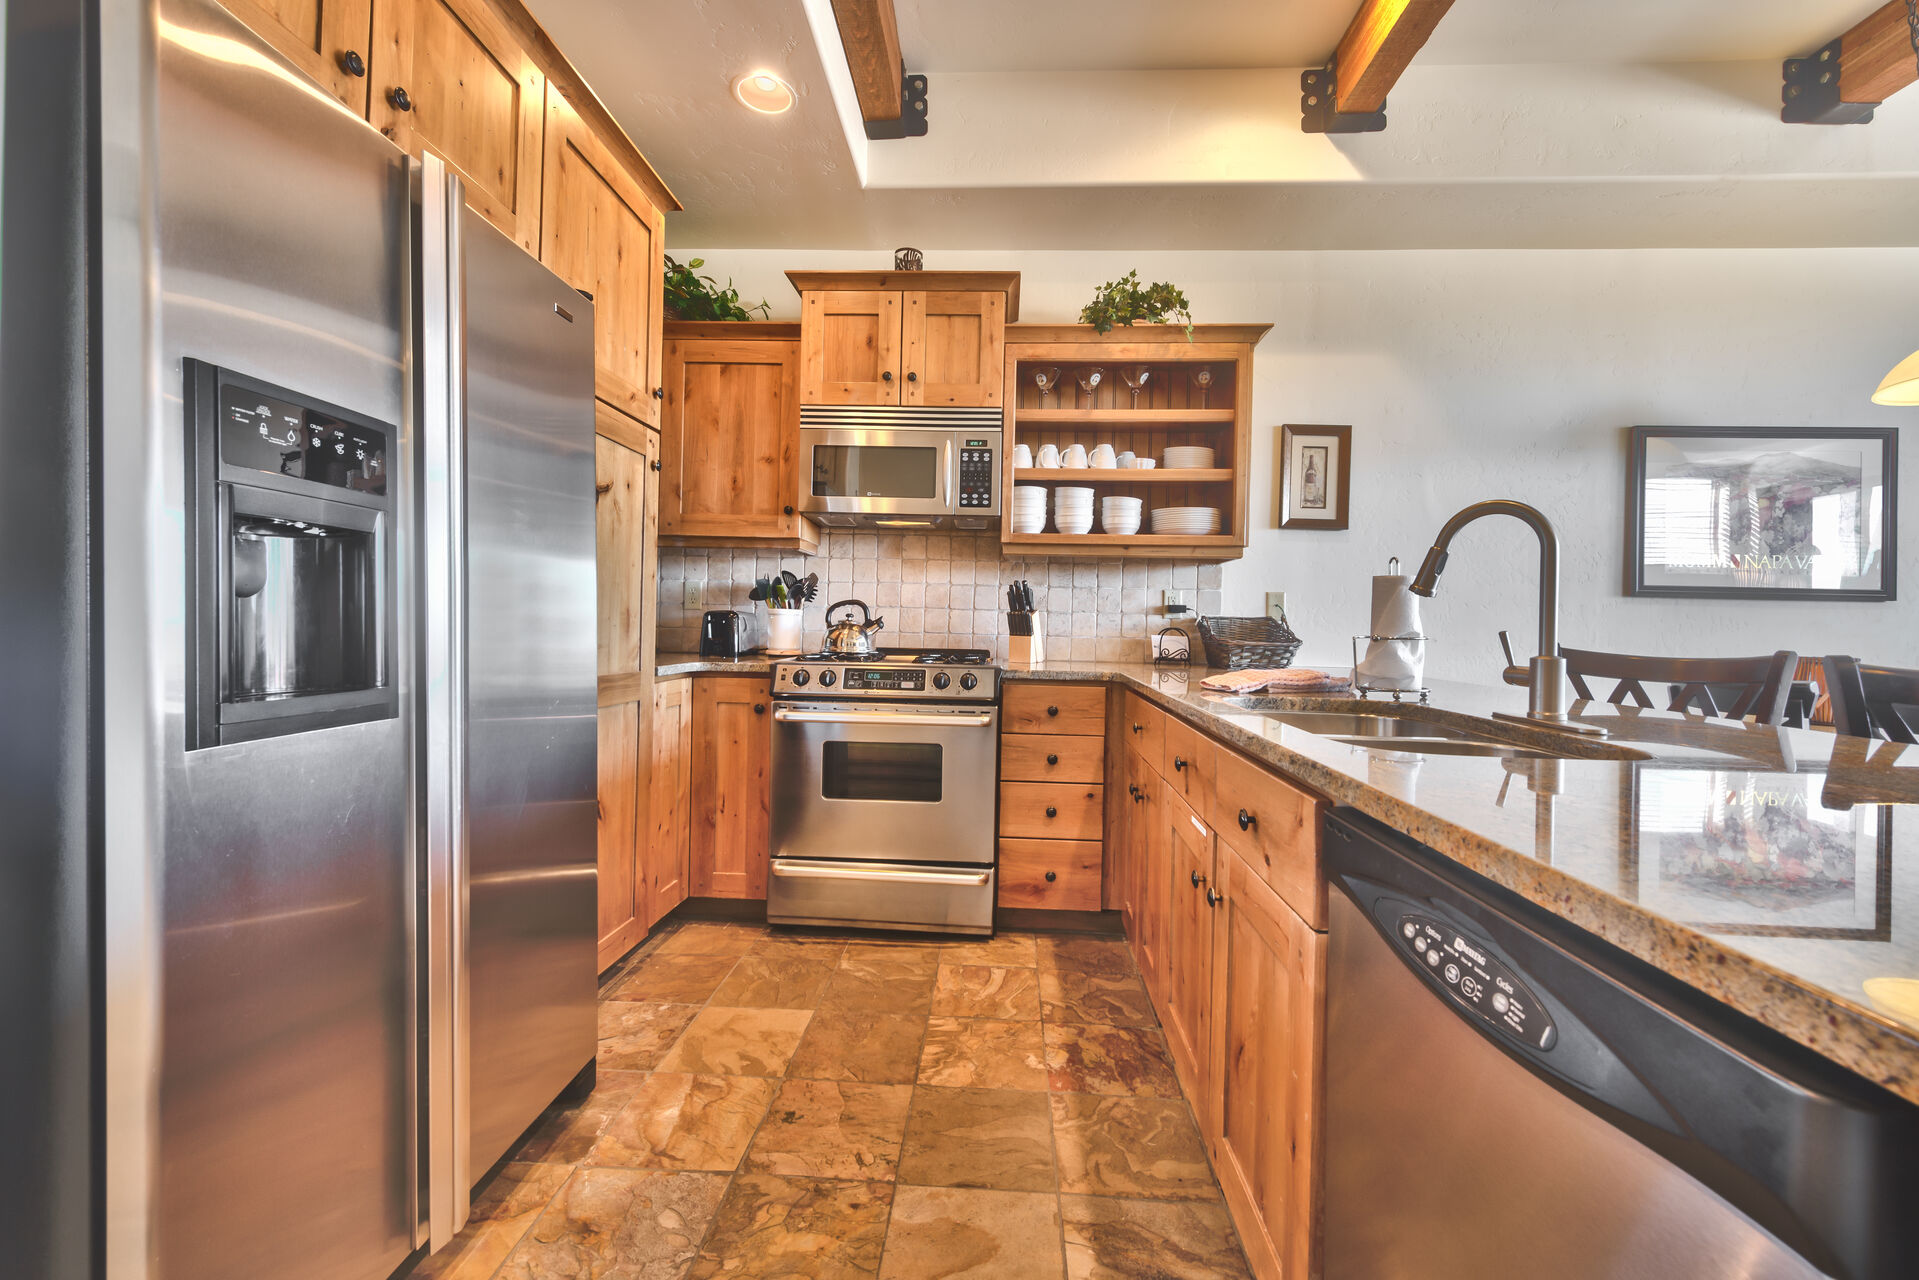 Fully Equipped Kitchen with Granite Counters and Stainless Steel Appliances